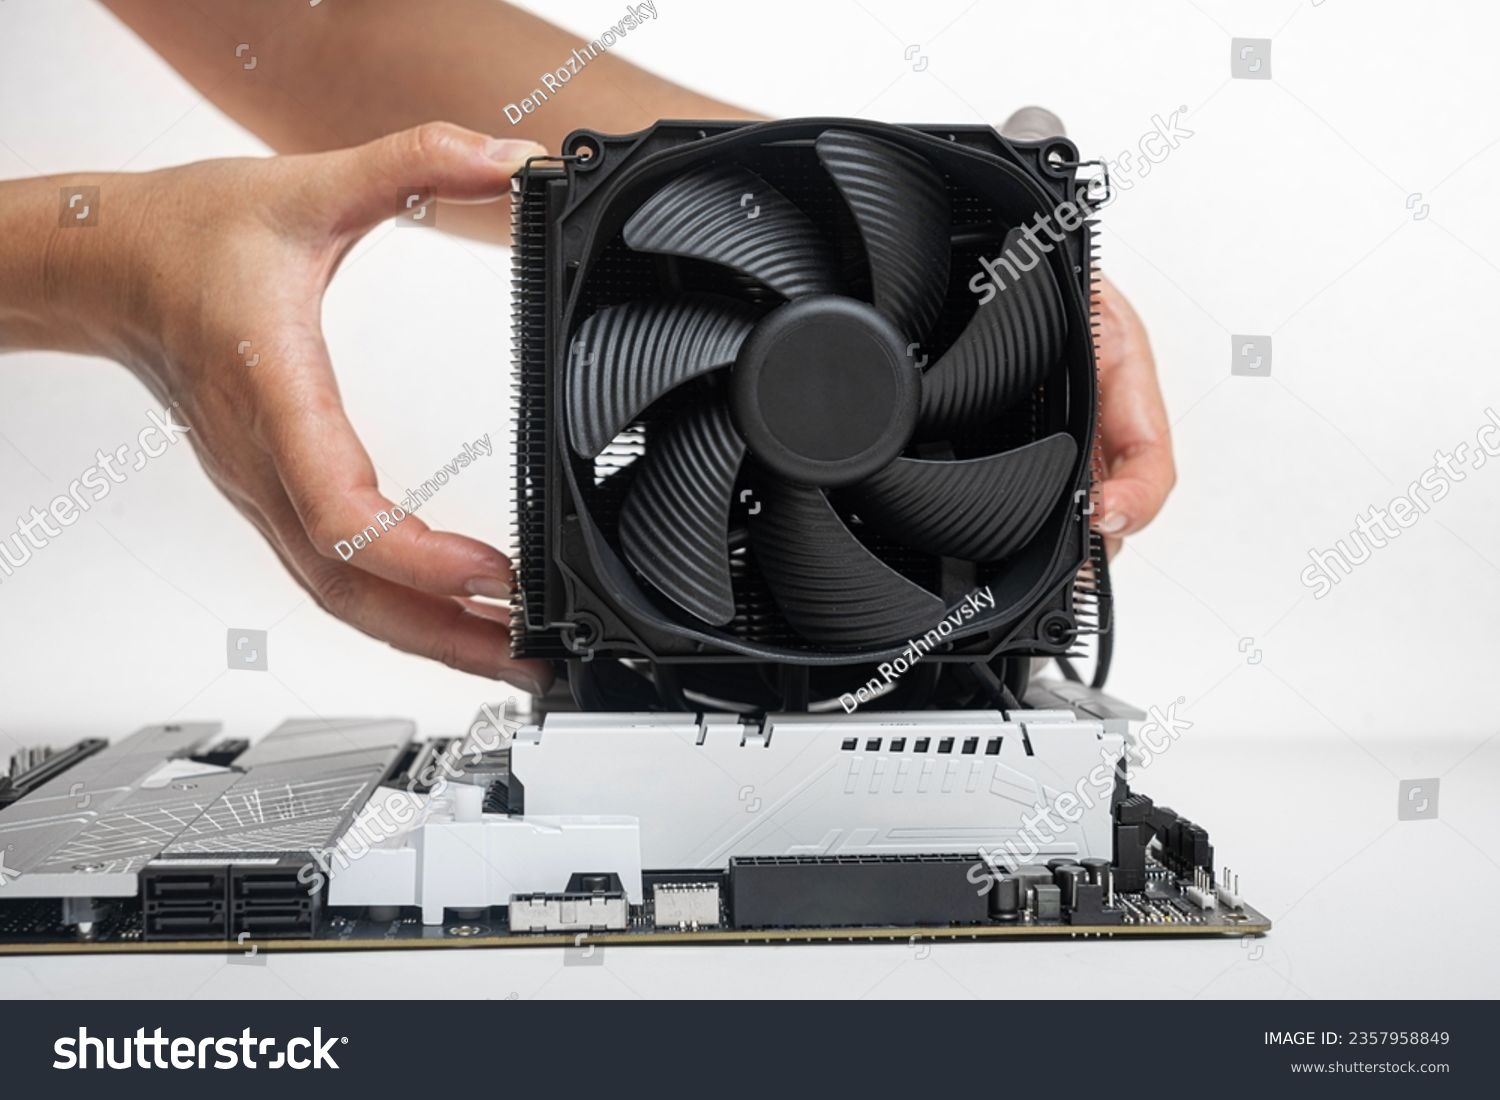 Installing a large air cooler on a computer processor. #2357958849